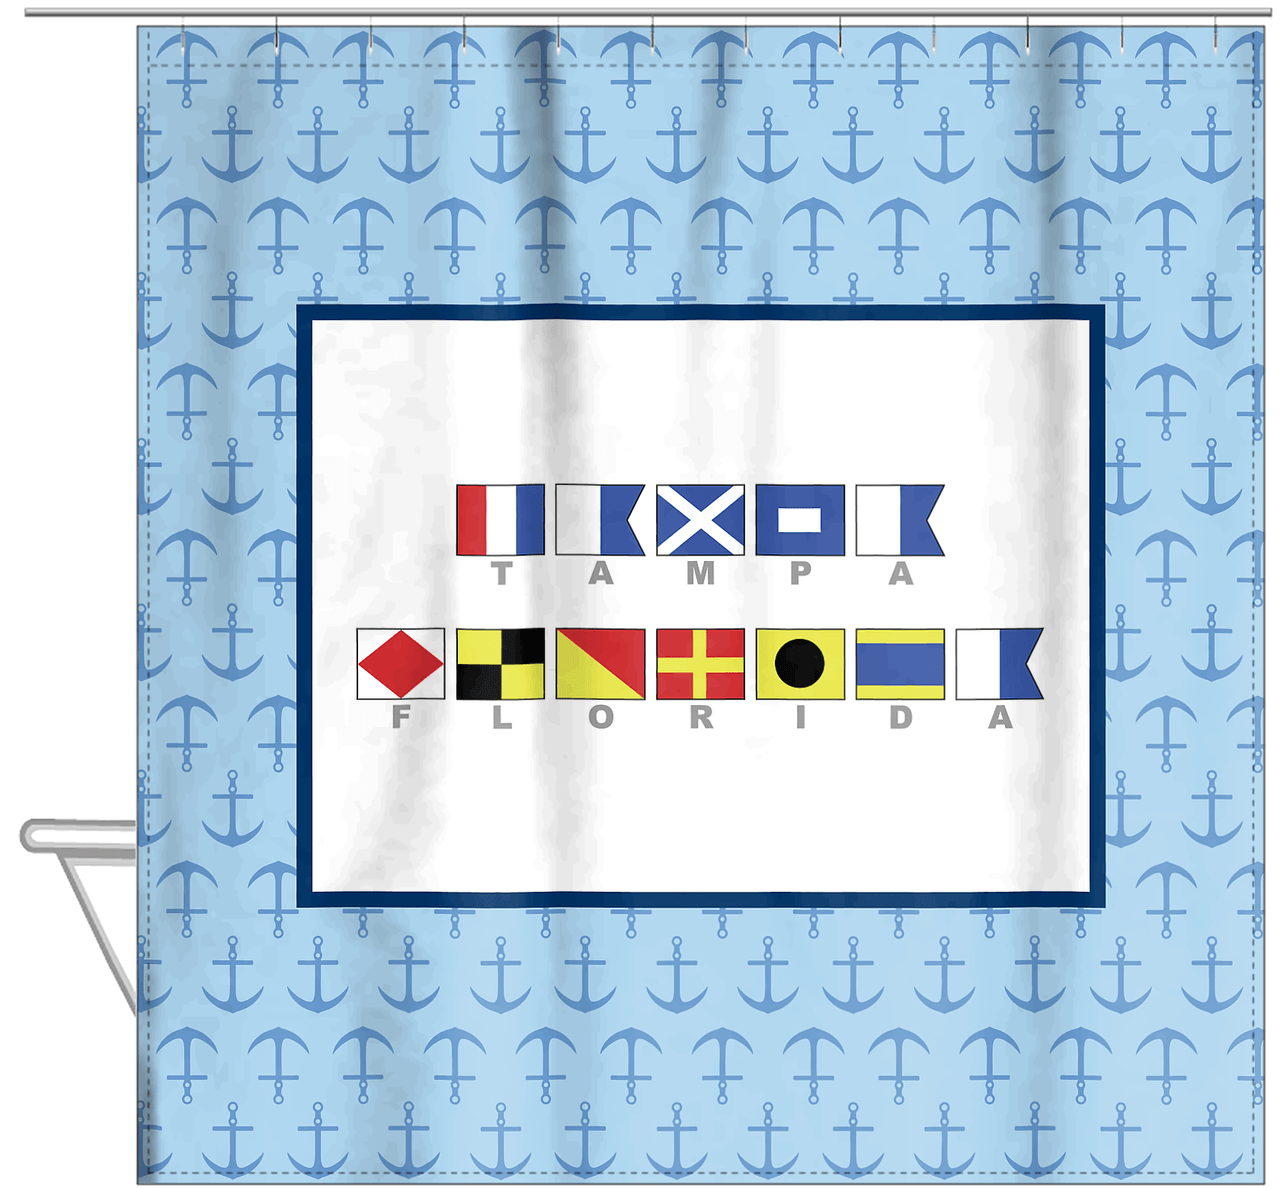 Personalized Nautical Flags Shower Curtain with Anchors - Blue and Navy - Flags with Grey Letters - Hanging View